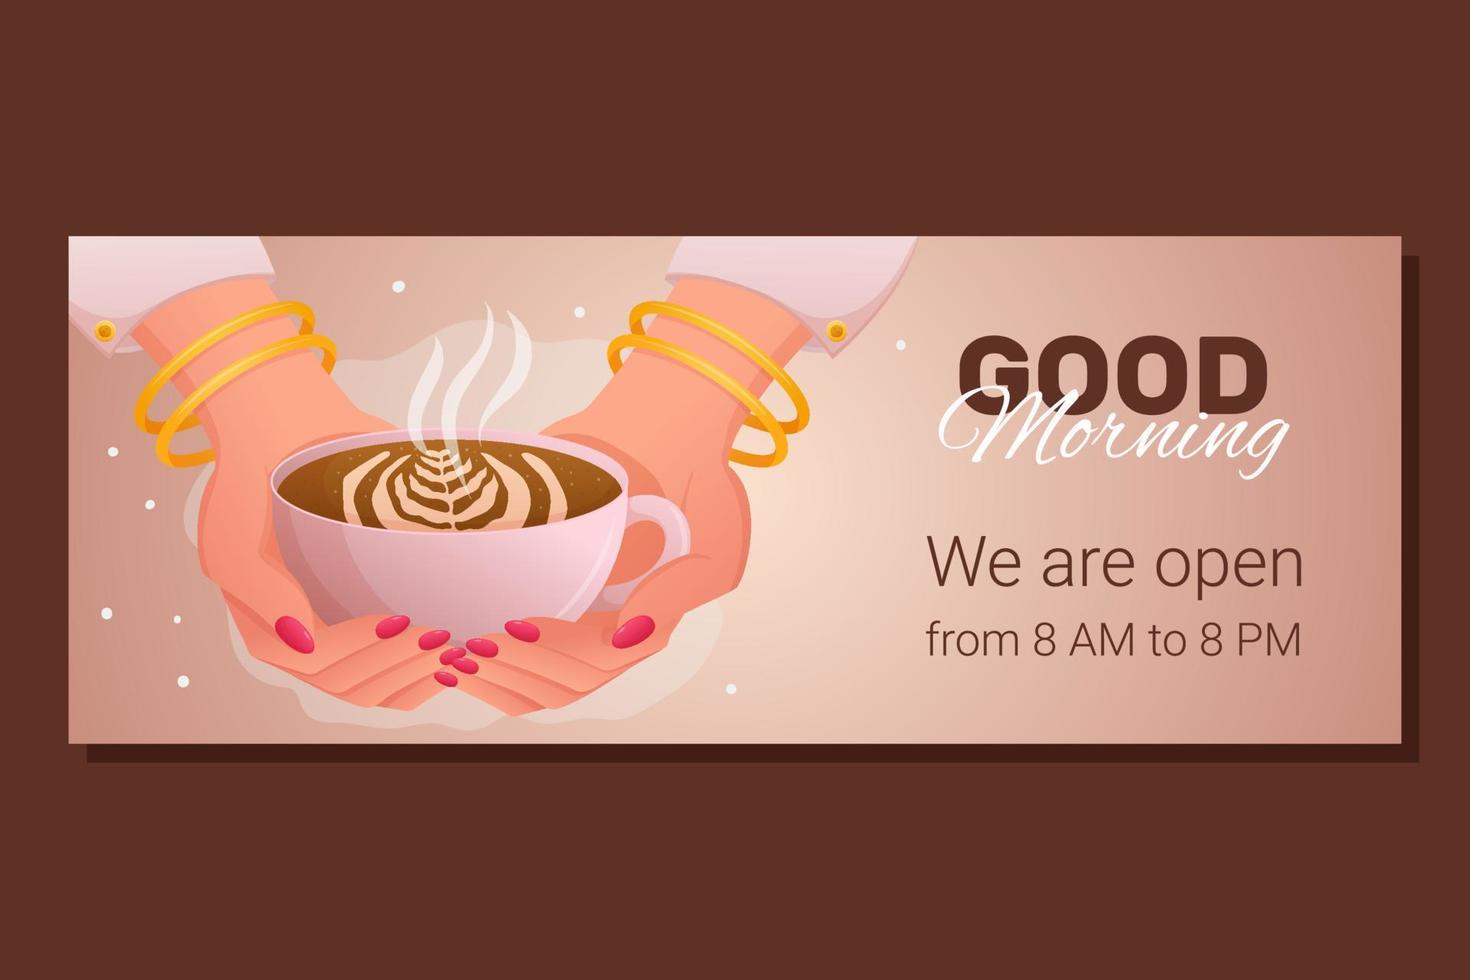 Hands of a young woman with white sleeves, gold bracelets, and pink manicure on her nails hold cup of coffee with Good Morning phrase. Closeup view illustration. Coffee shop banner design. vector